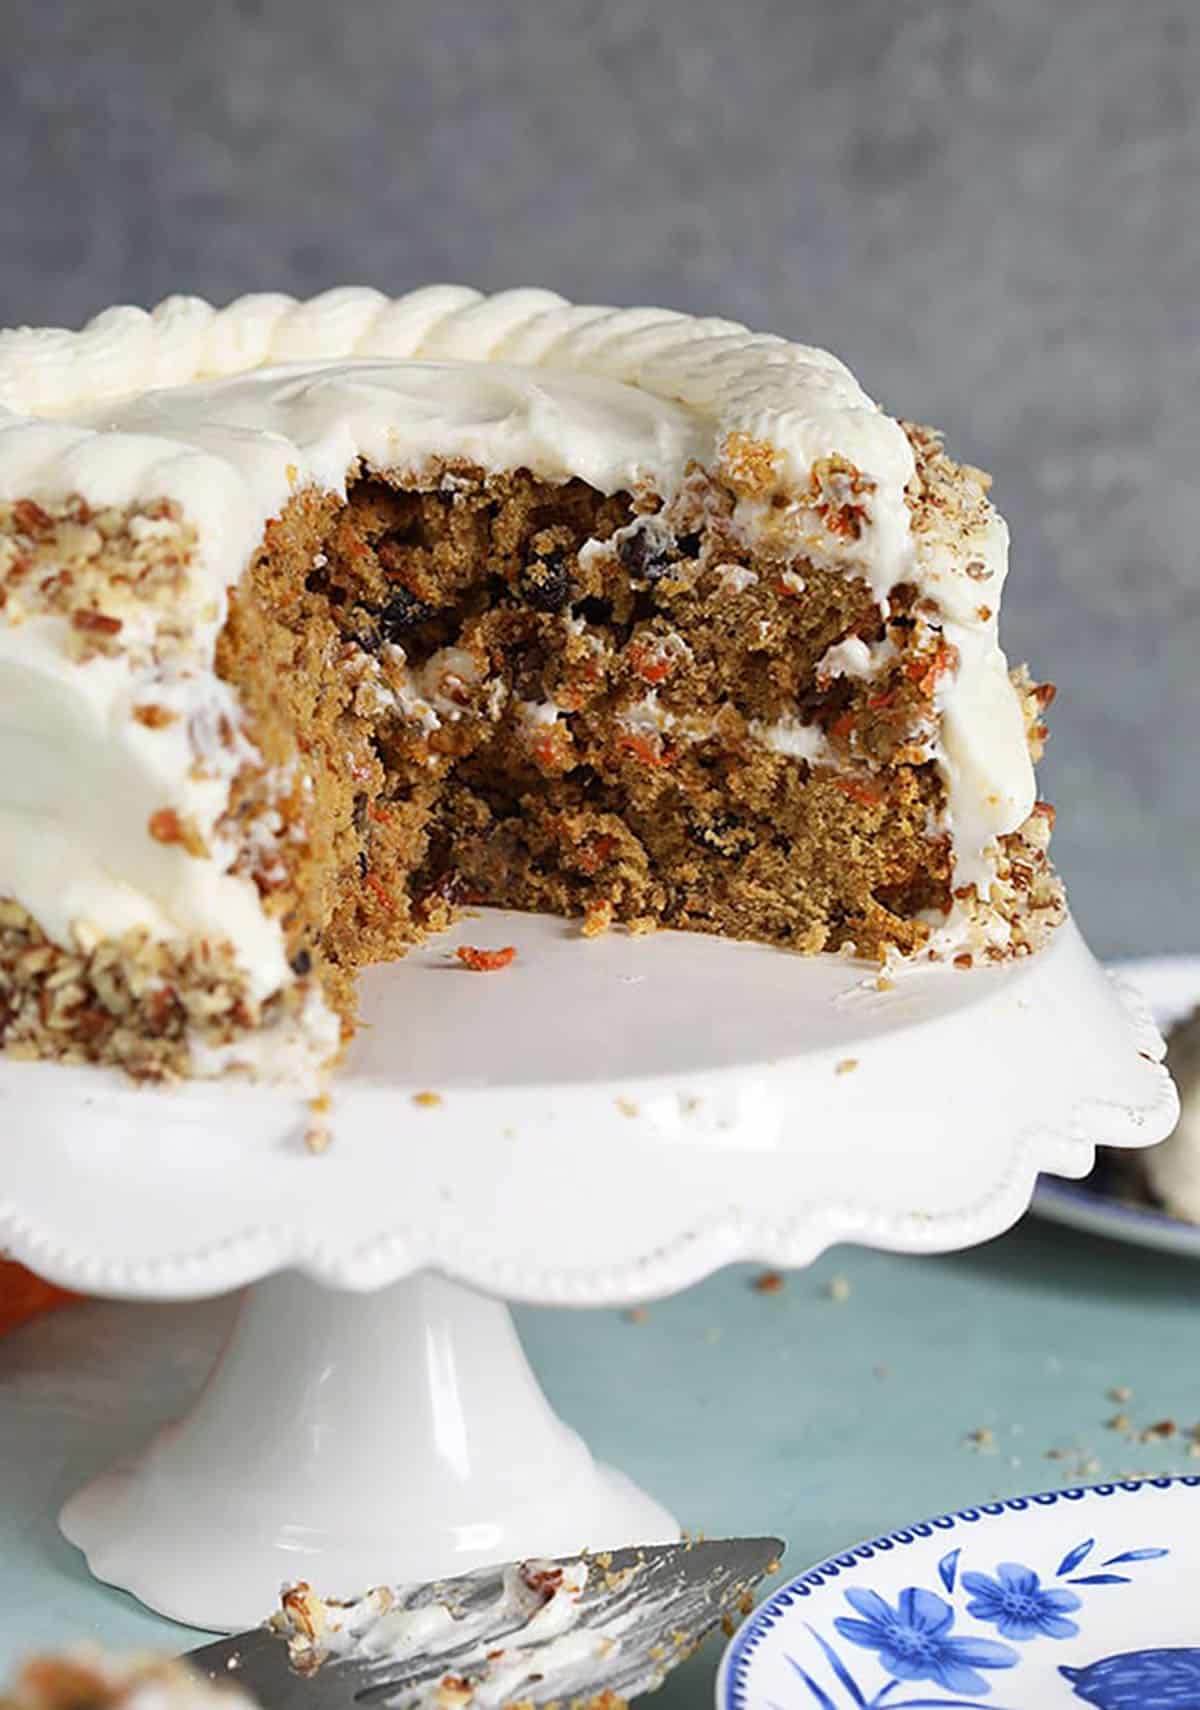 Carrot cake on a white cake plate with a slice taken out.